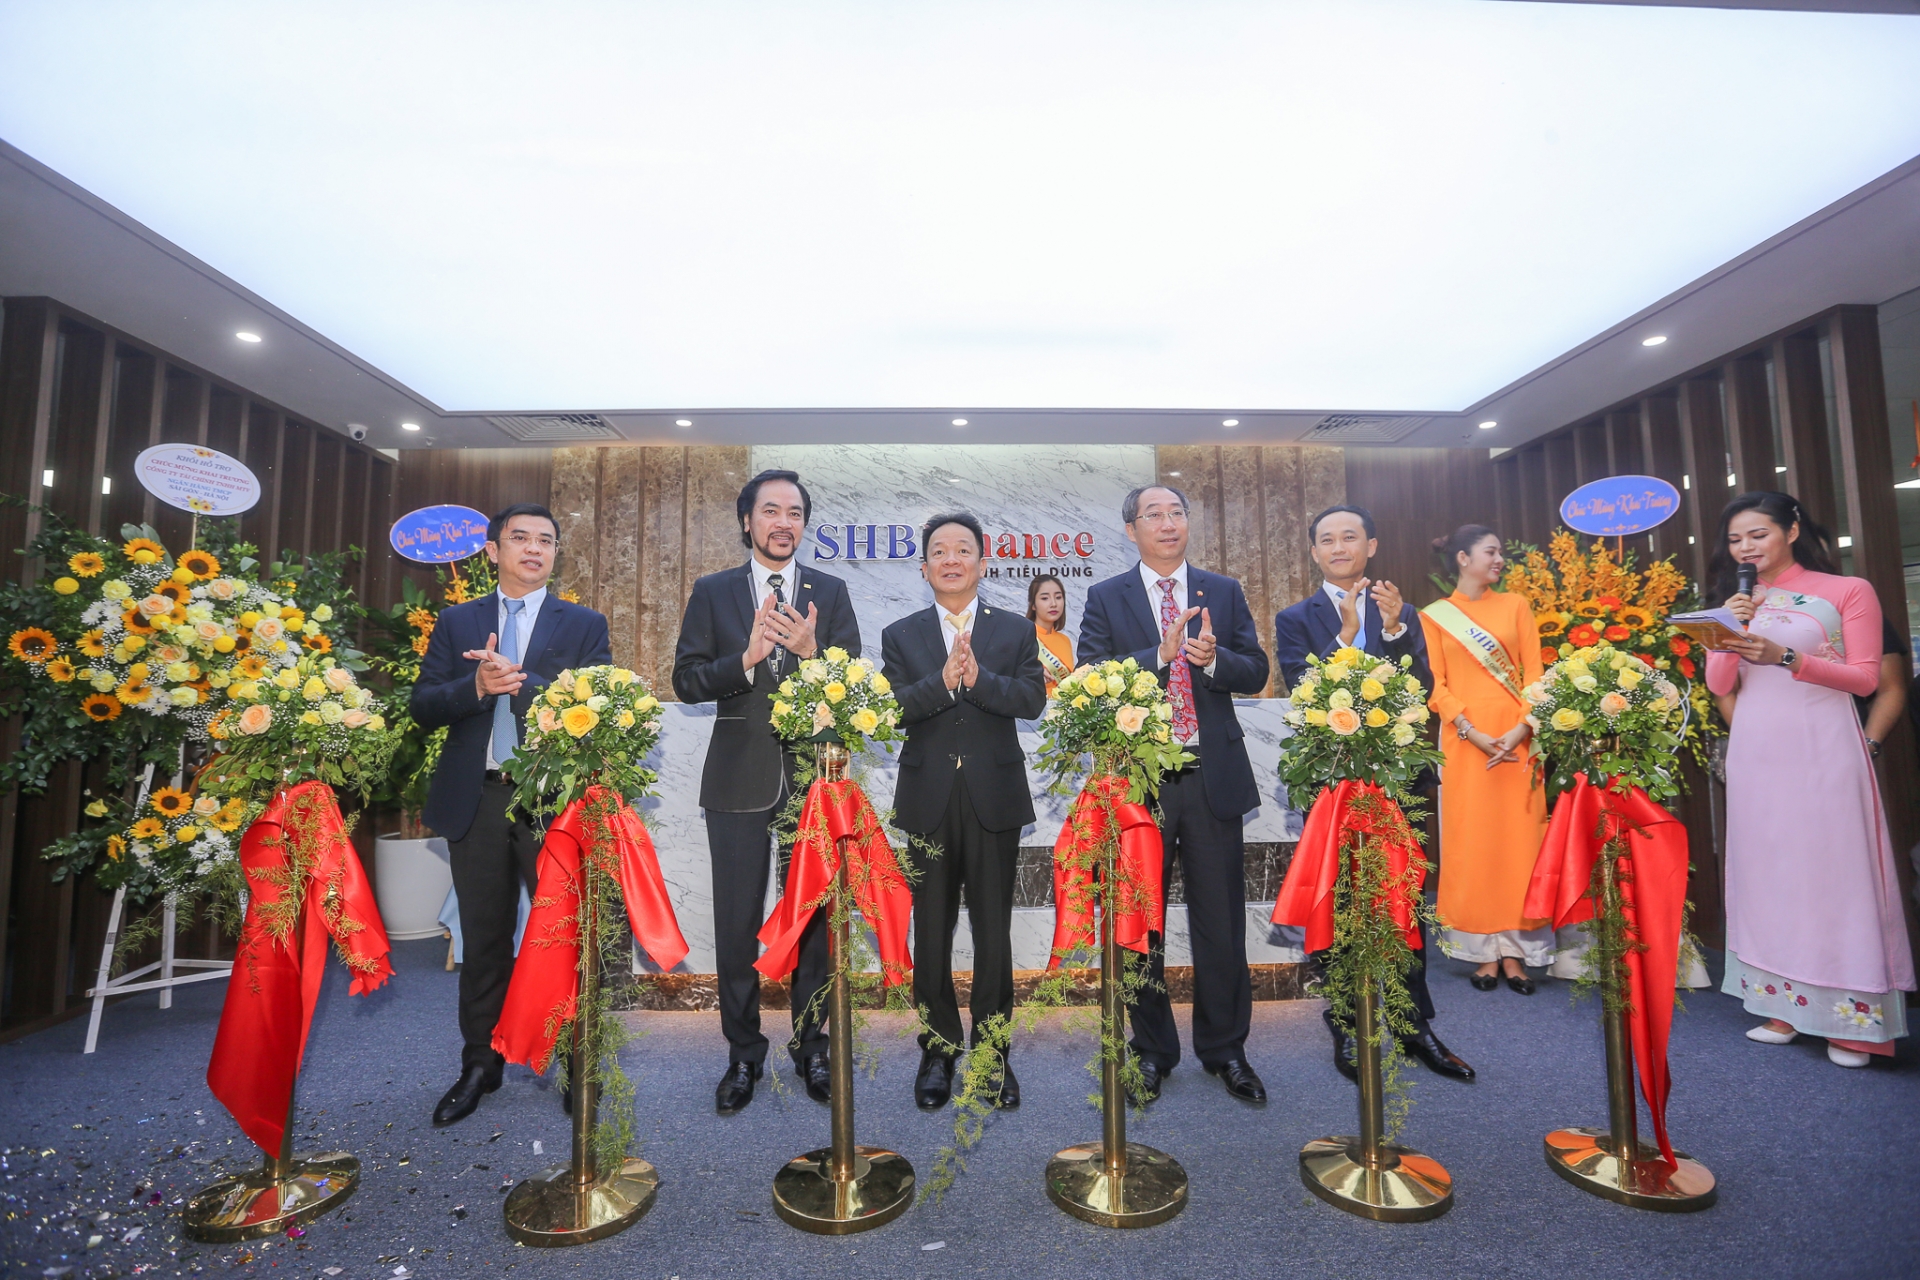 SHB Finance inaugurates new headquarters and new unsecured loan